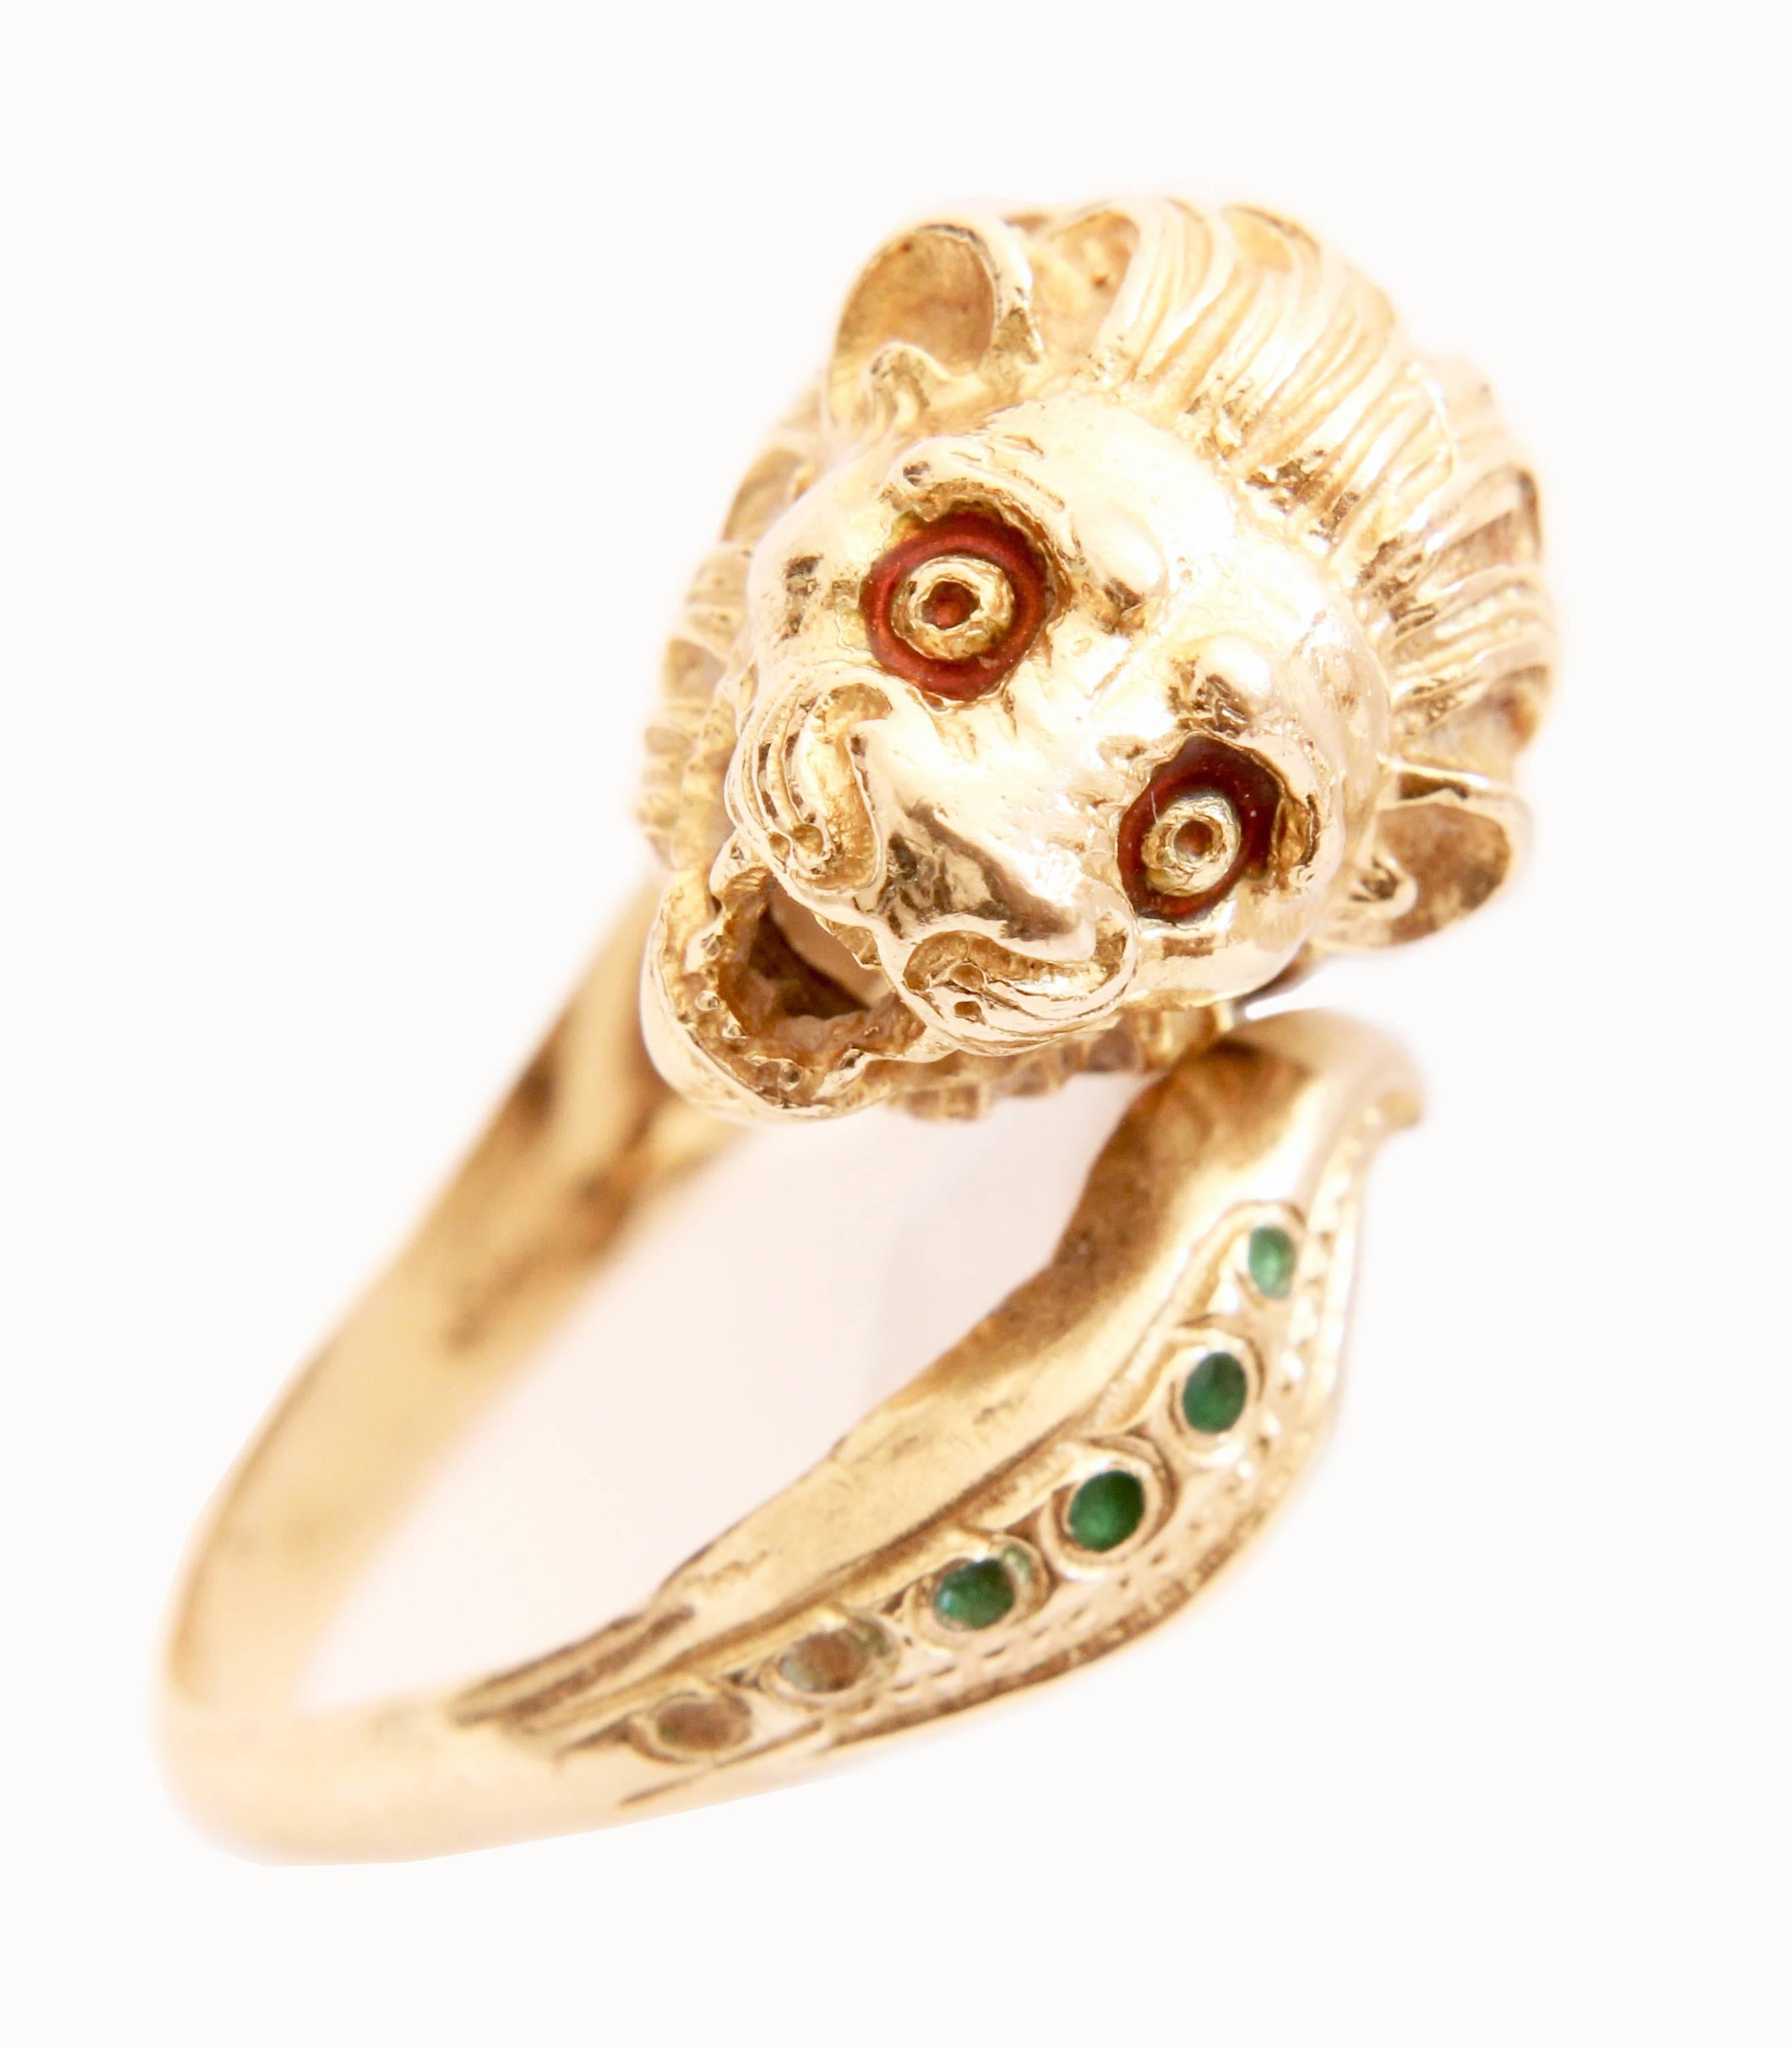 Lion Head Ring 18K Gold with Enamel Art Deco Figural Sz 6.5 1960s Rare In Good Condition For Sale In Port Saint Lucie, FL